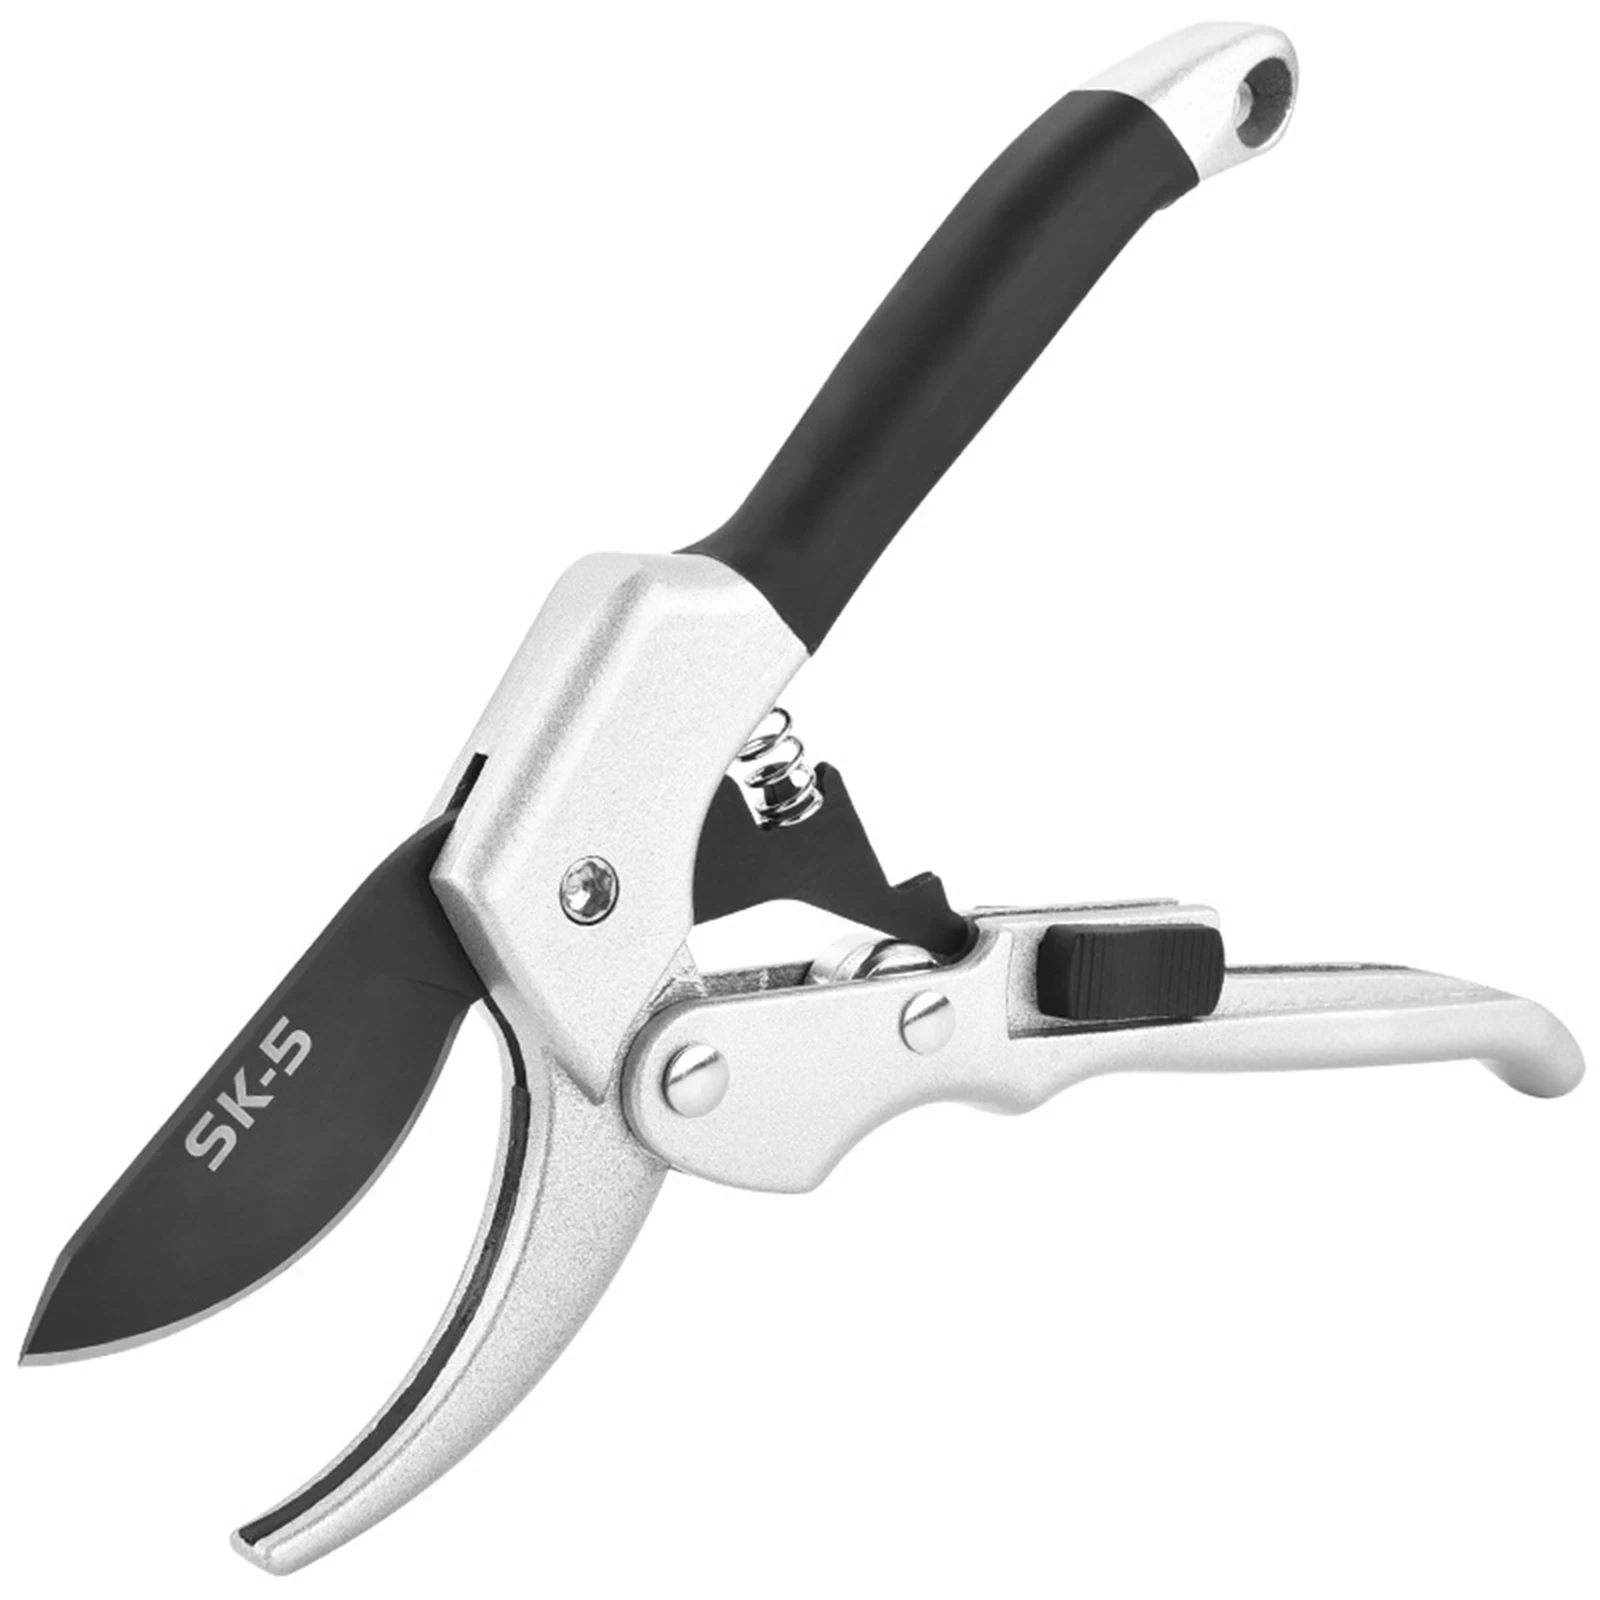 

Garden Hand Pruning Shears Professional SK5 Steel Curve Blade Garden Shears Pruner Gardening Tool Safety Lock